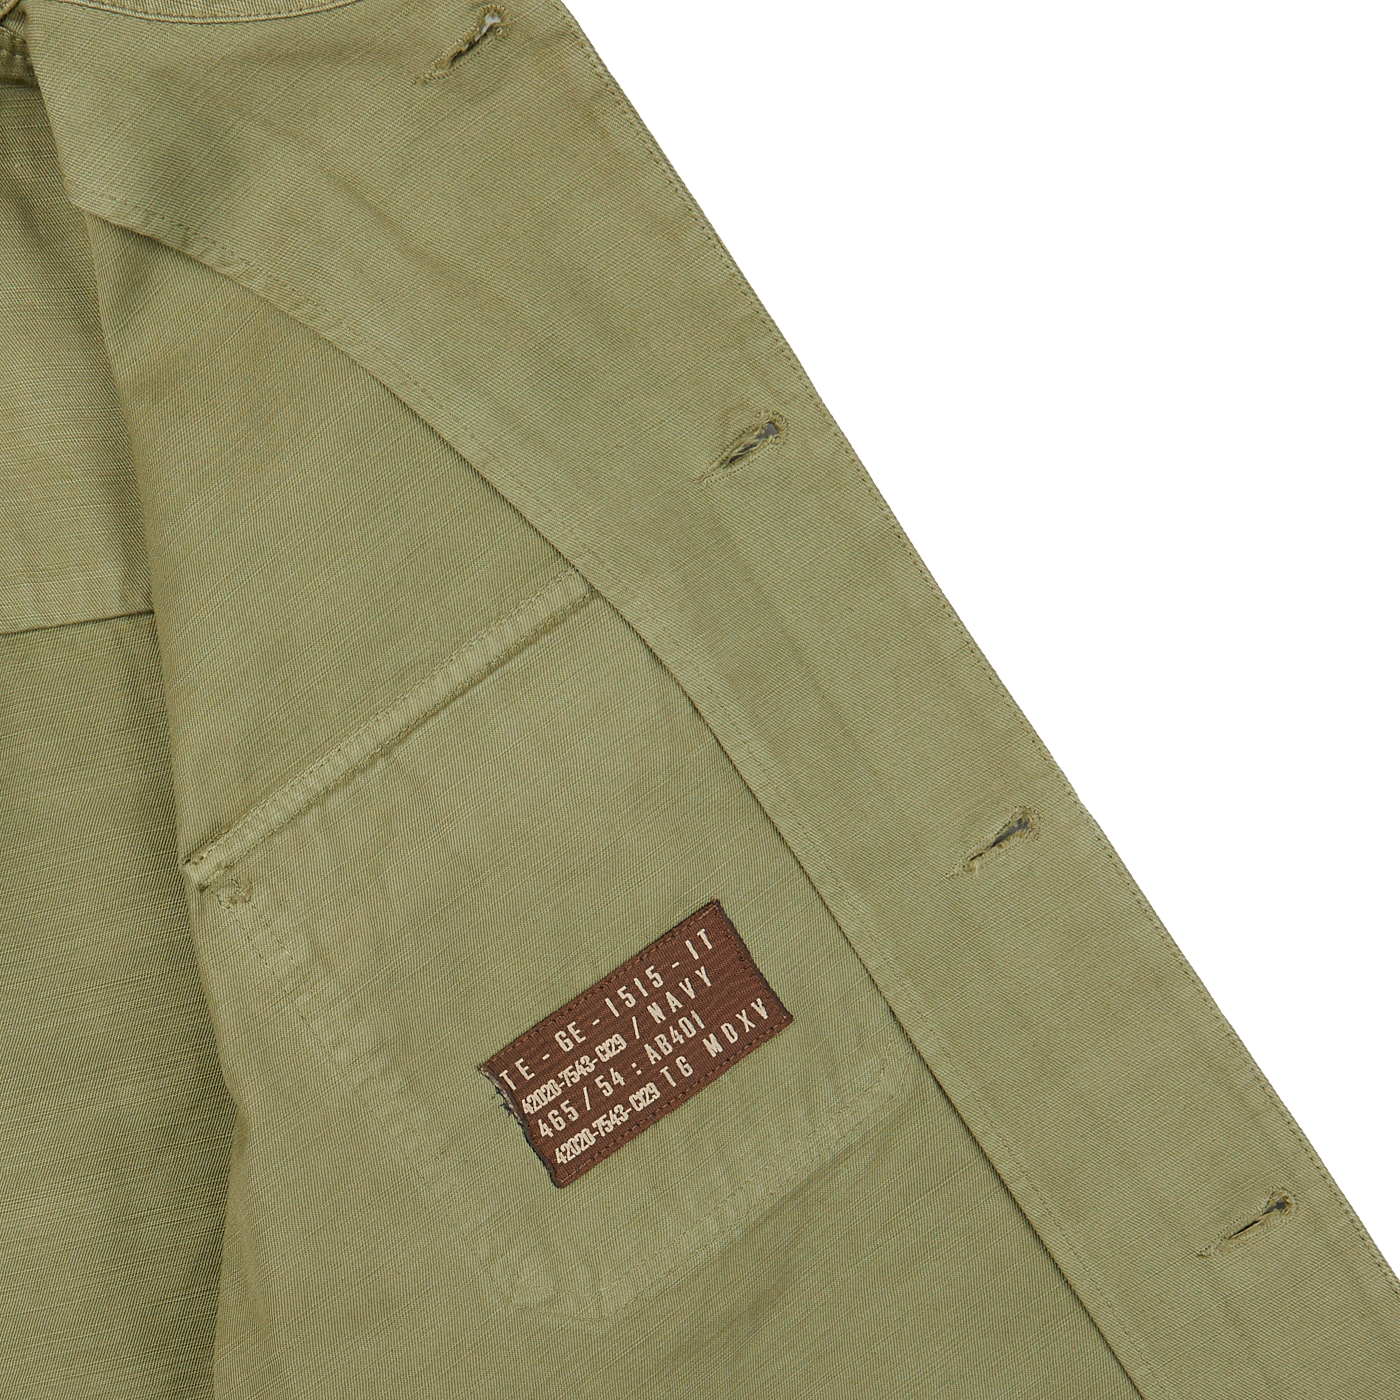 The pocket of a Grass Green Greto Cotton Overshirt with a brown label on it by Tela Genova.